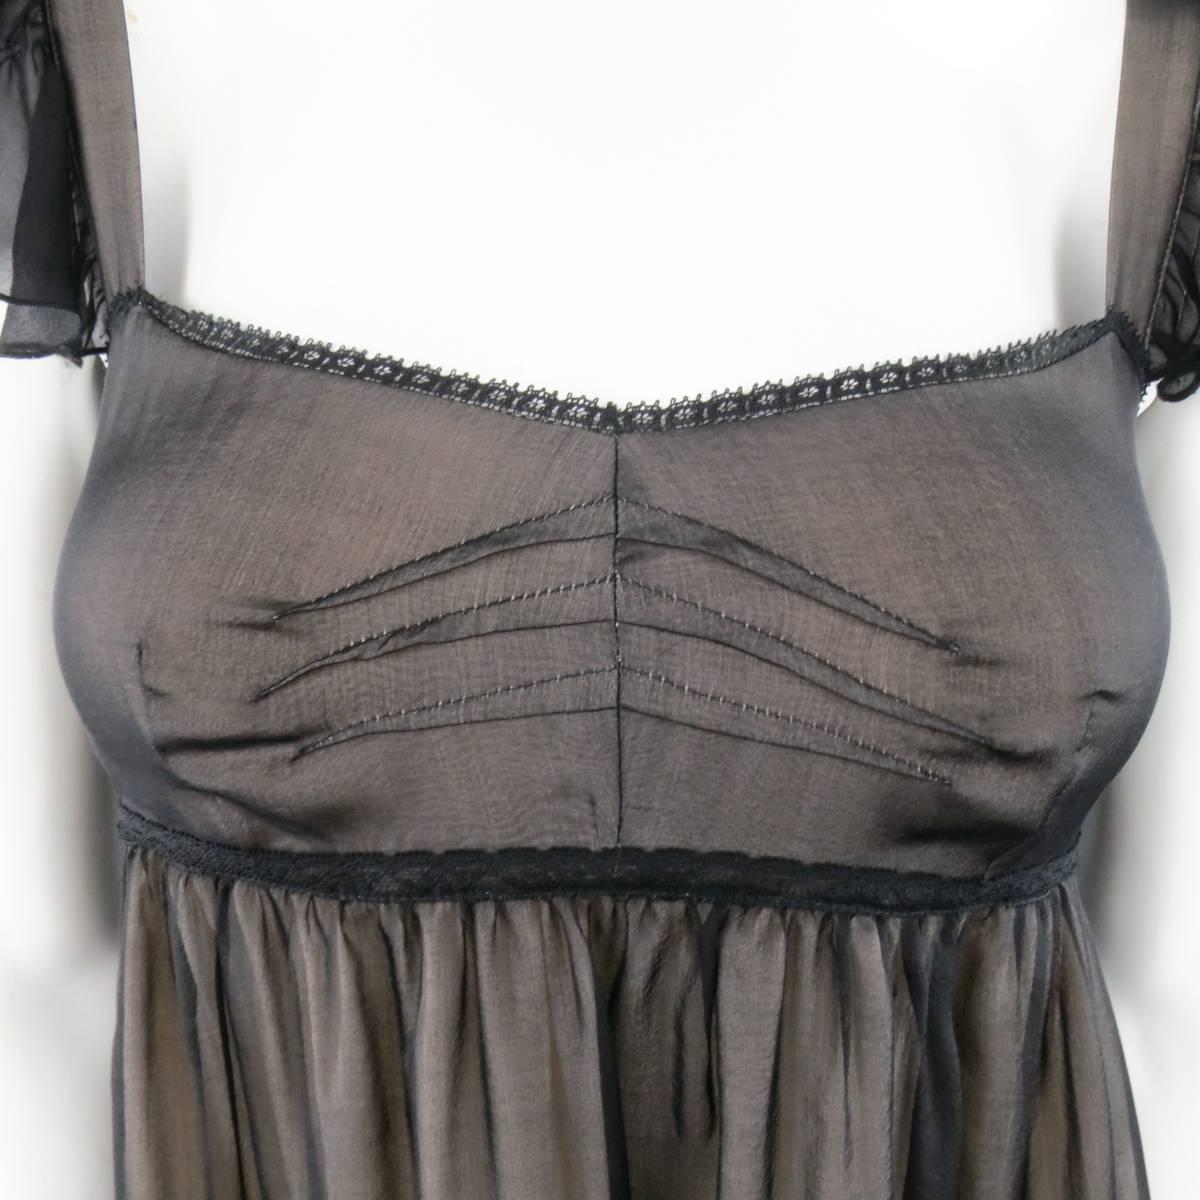 D&G by DOLCE & GABBANA lingerie inspired camisole blouse comes in black sheer chiffon with beige liner and features a ruffled cap sleeve, darted bust, empire waist with lace trim, A-line silhouette with raw edge ruffle panel, and long fringe